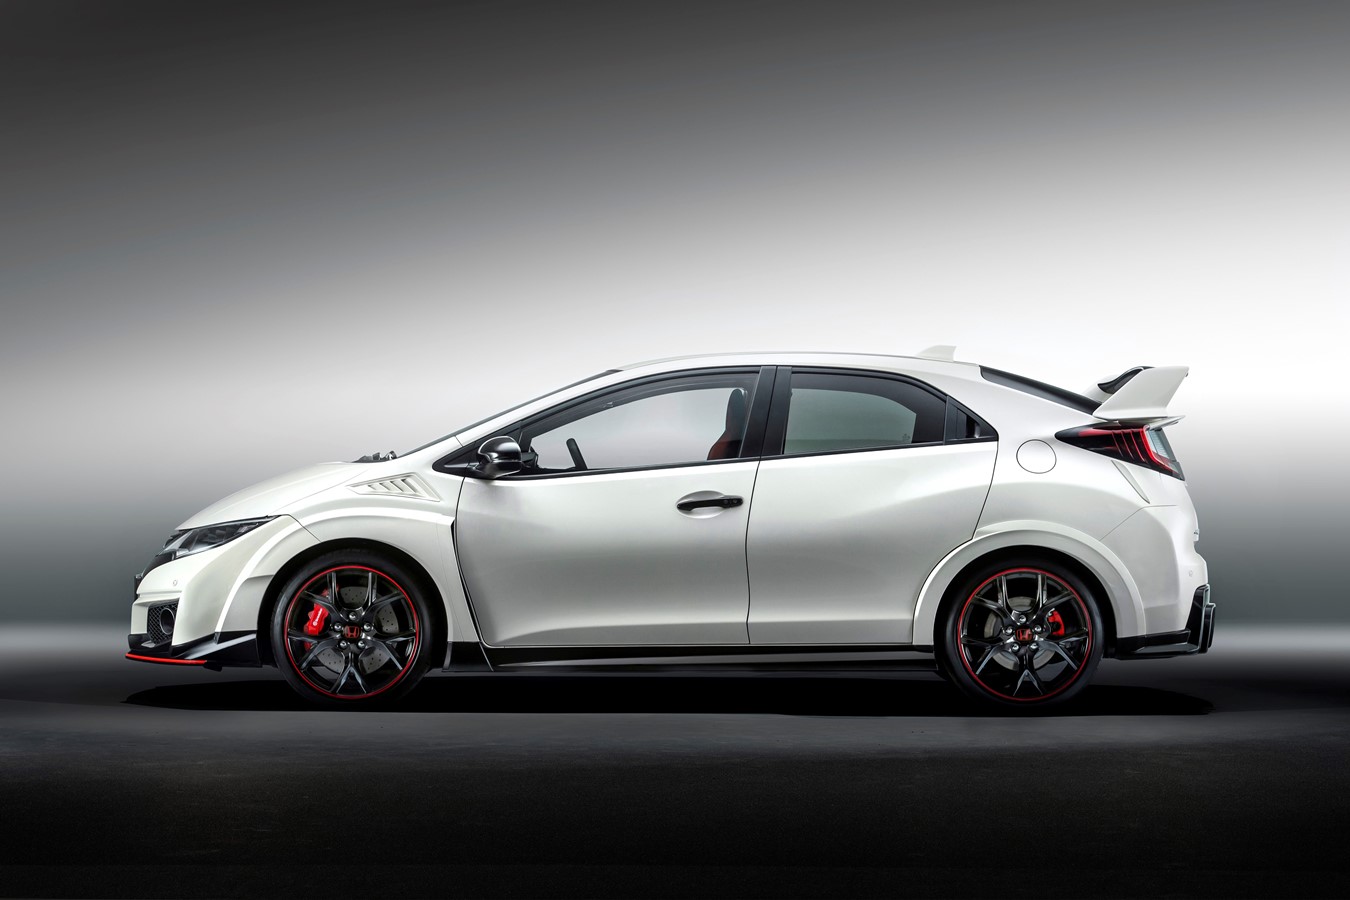 Nürburgring plays host to exclusive event for Civic Type R fans